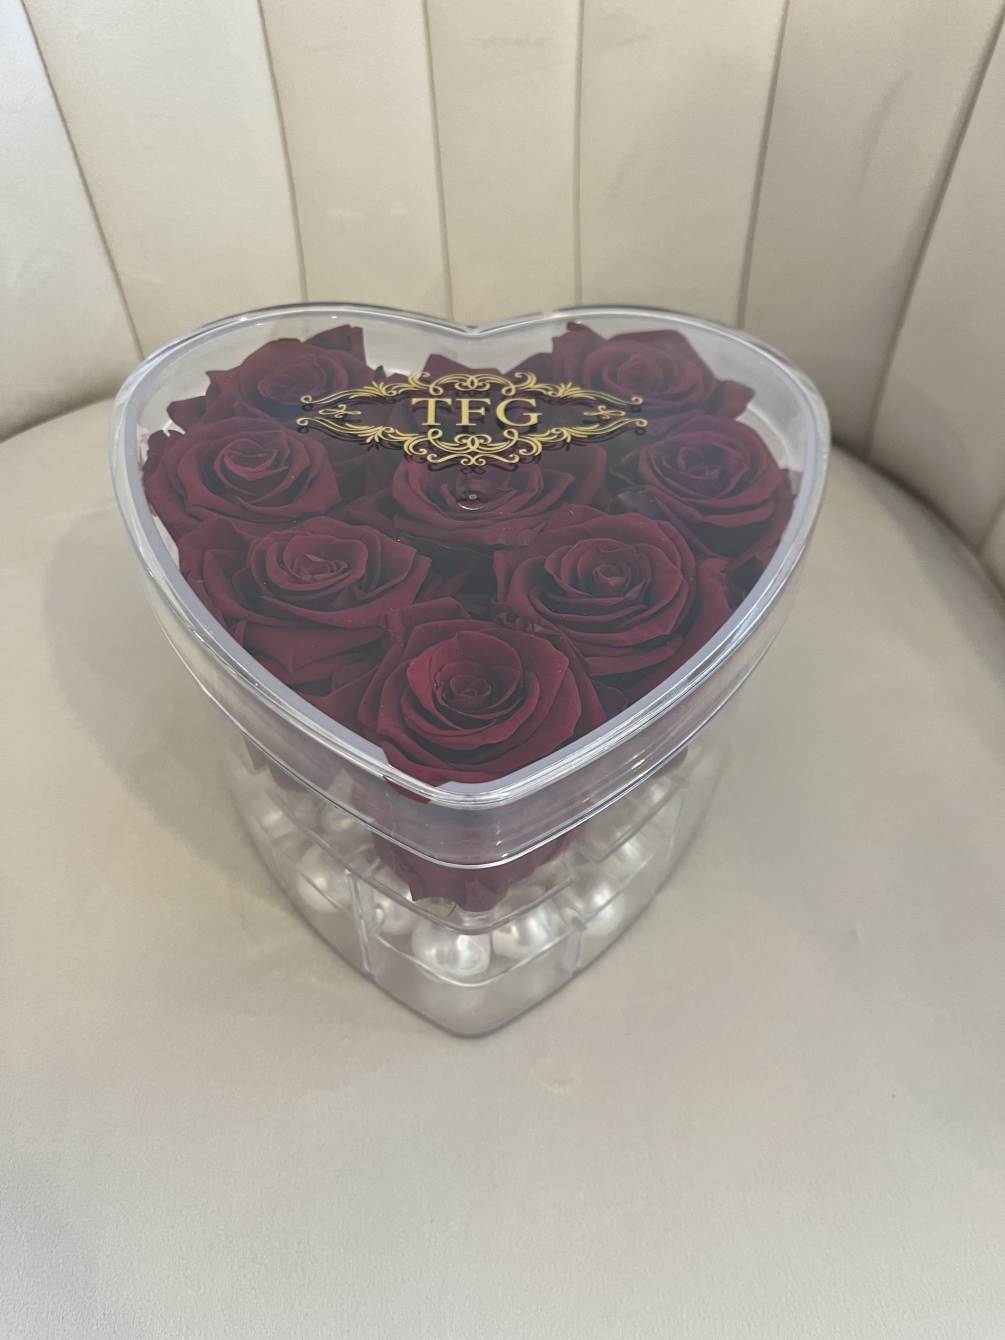 Preserved 9 red roses in acrylic heart shape box. Real roses that